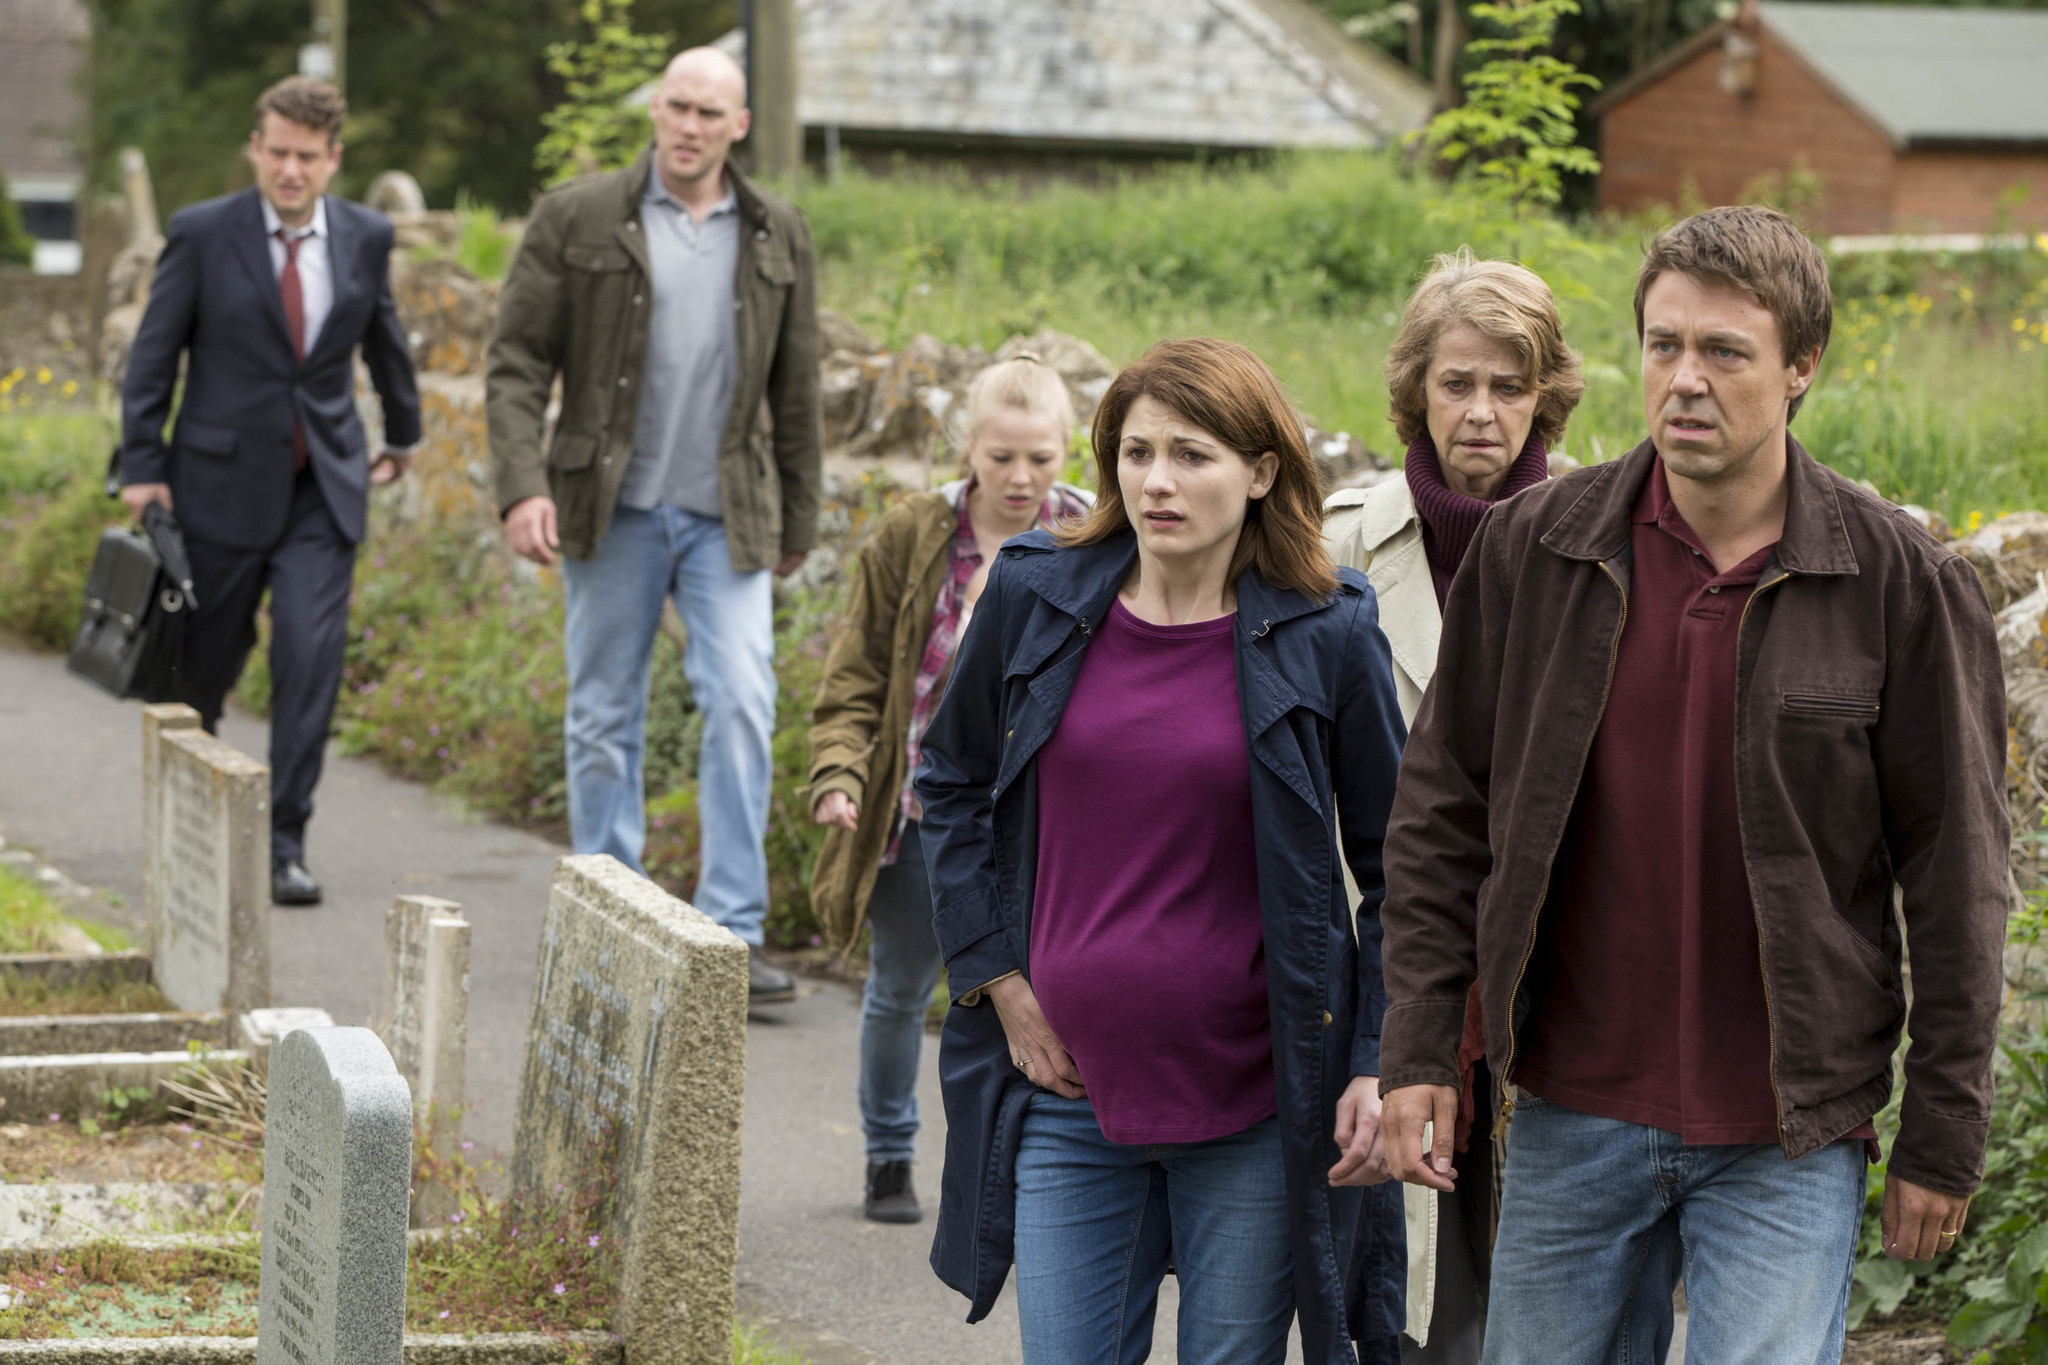 Still of Charlotte Rampling, Jodie Whittaker and Andrew Buchan in Broadchurch (2013)